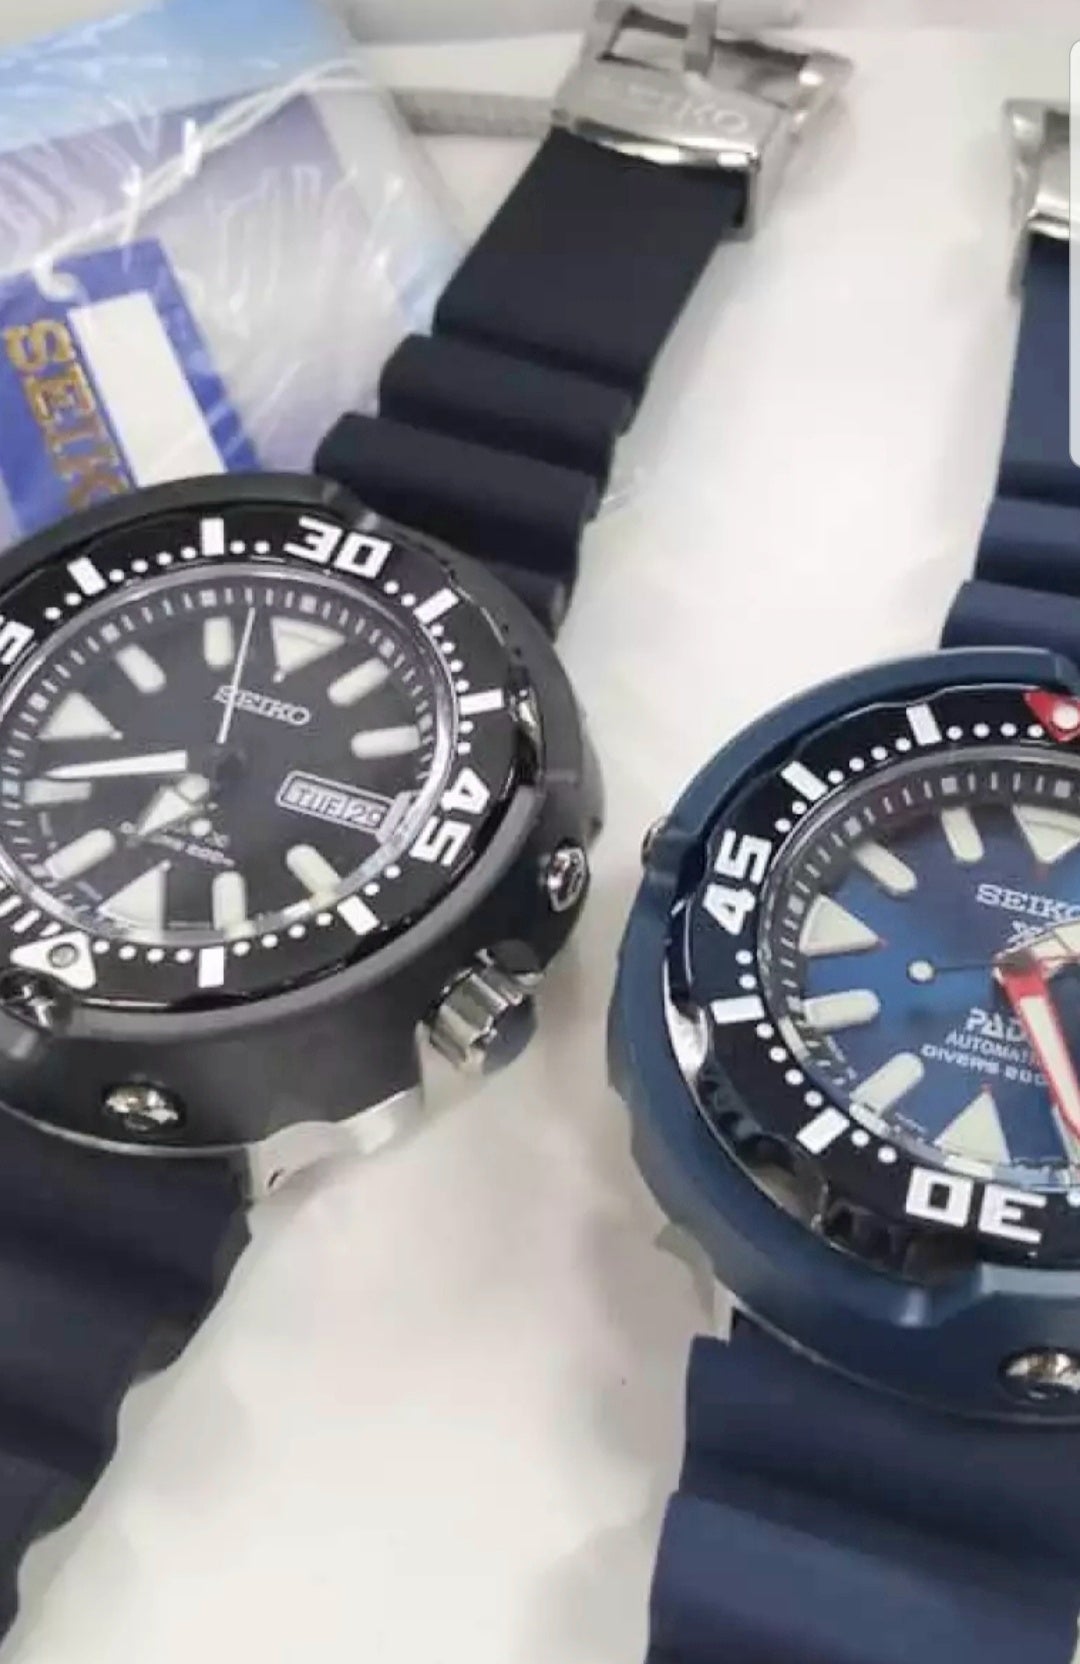 Be aware of new wave of fake Seiko watches | WatchUSeek Watch Forums